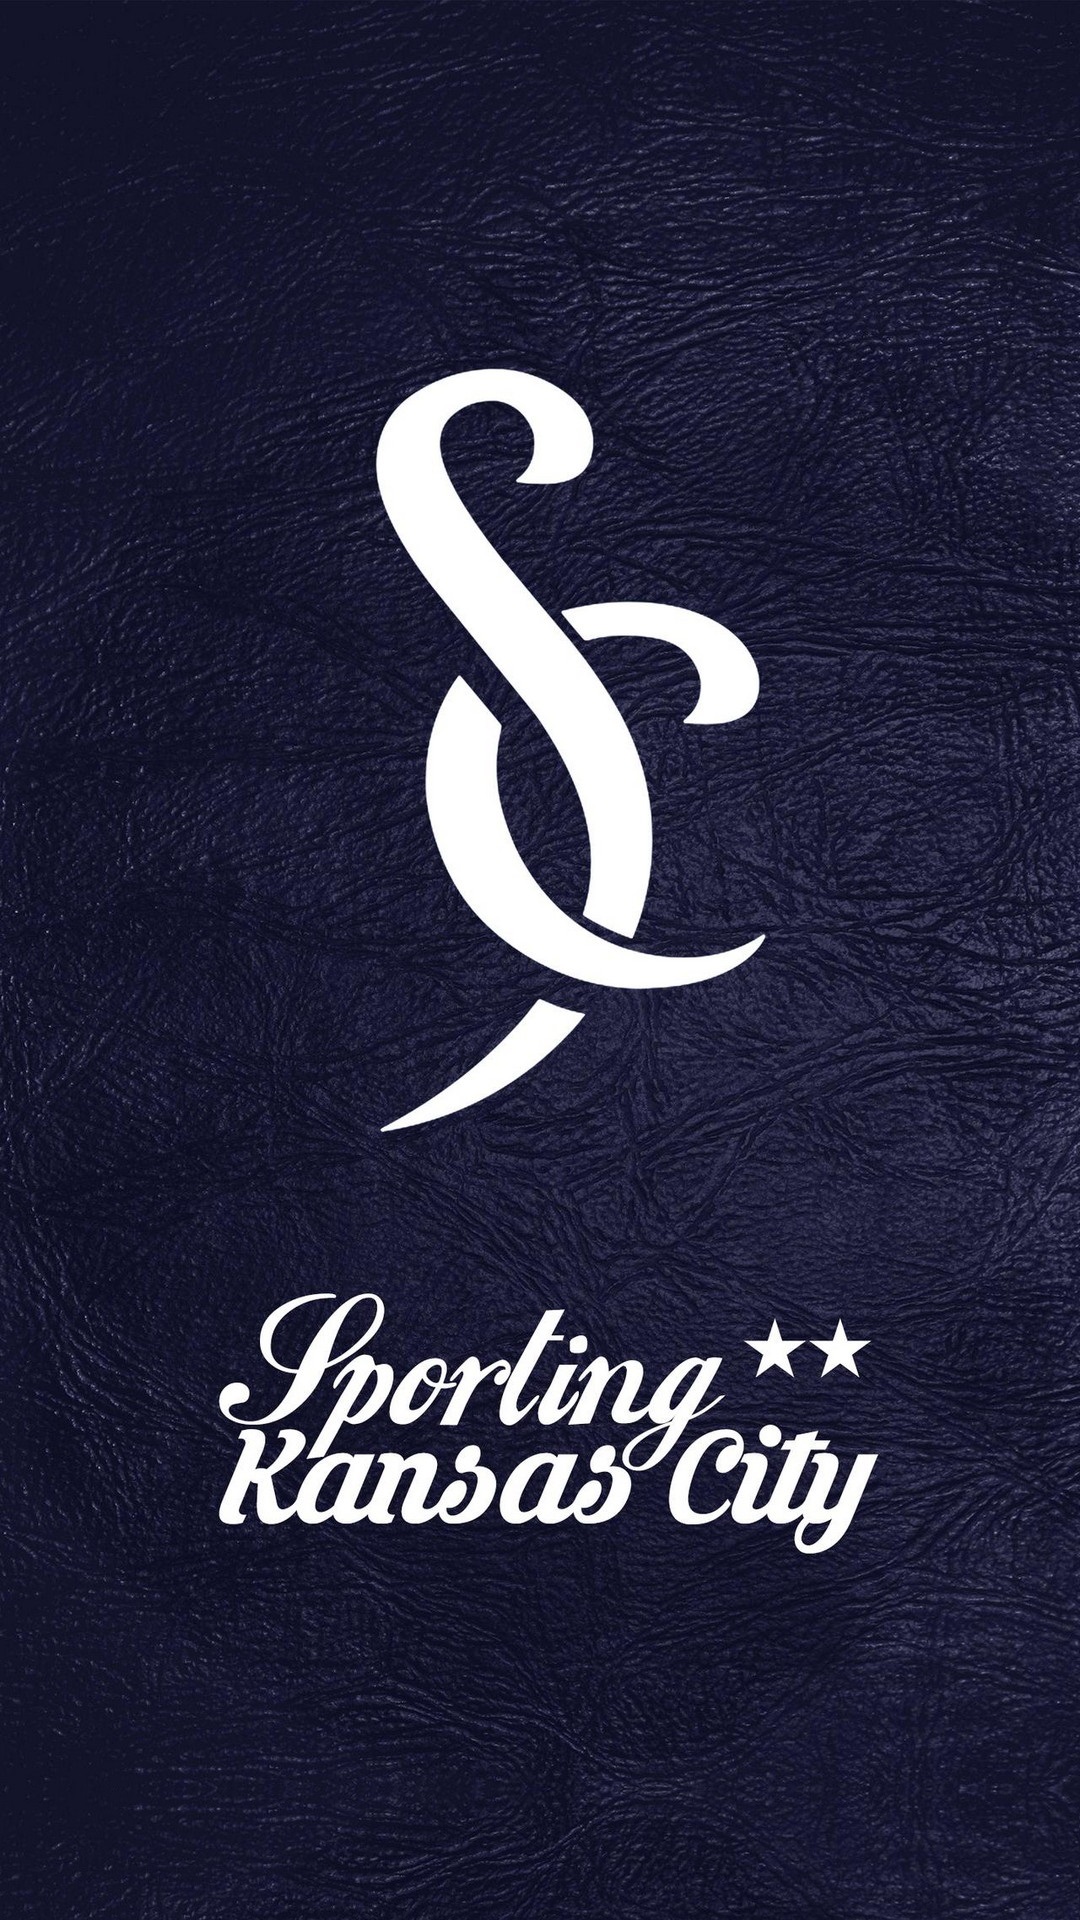 Sporting KC Wallpaper Mobile With high-resolution 1080X1920 pixel. You can use this wallpaper for your Desktop Computers, Mac Screensavers, Windows Backgrounds, iPhone Wallpapers, Tablet or Android Lock screen and another Mobile device